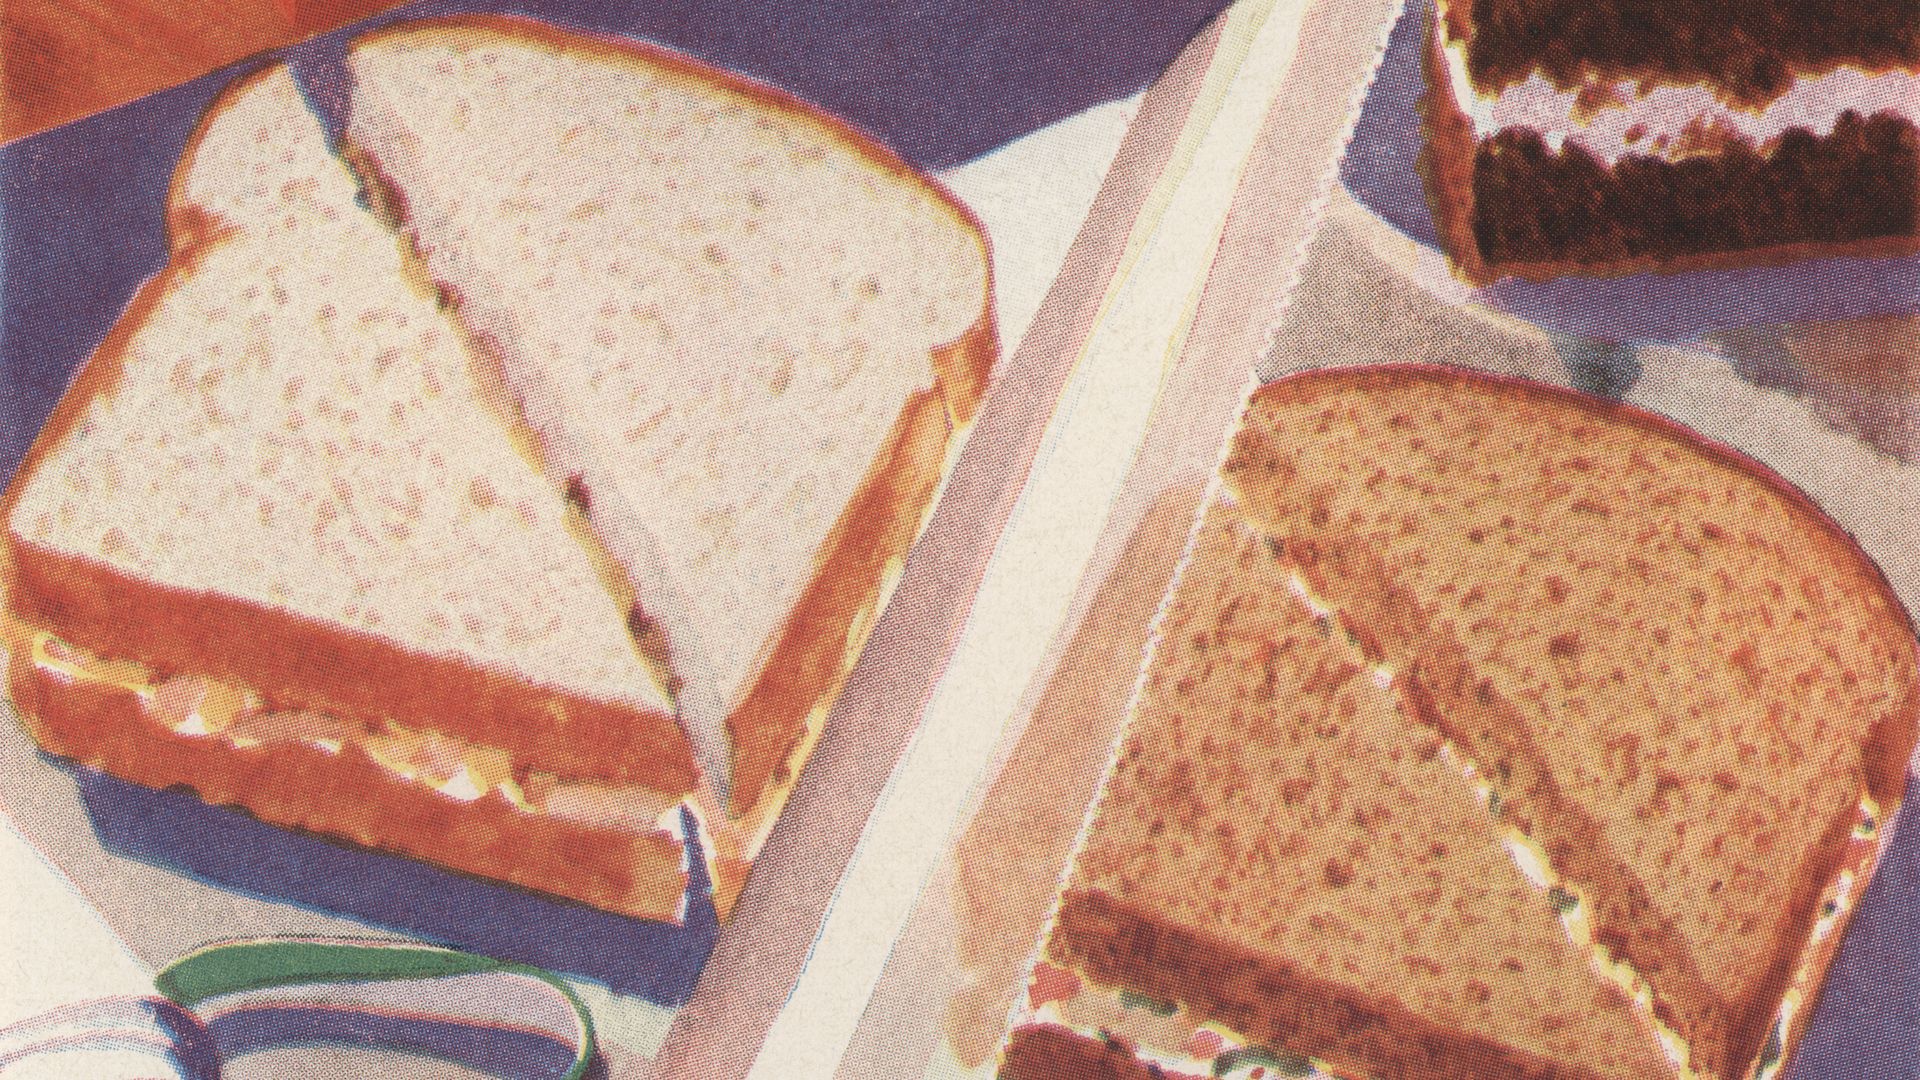 illustration of lunch sandwiches.